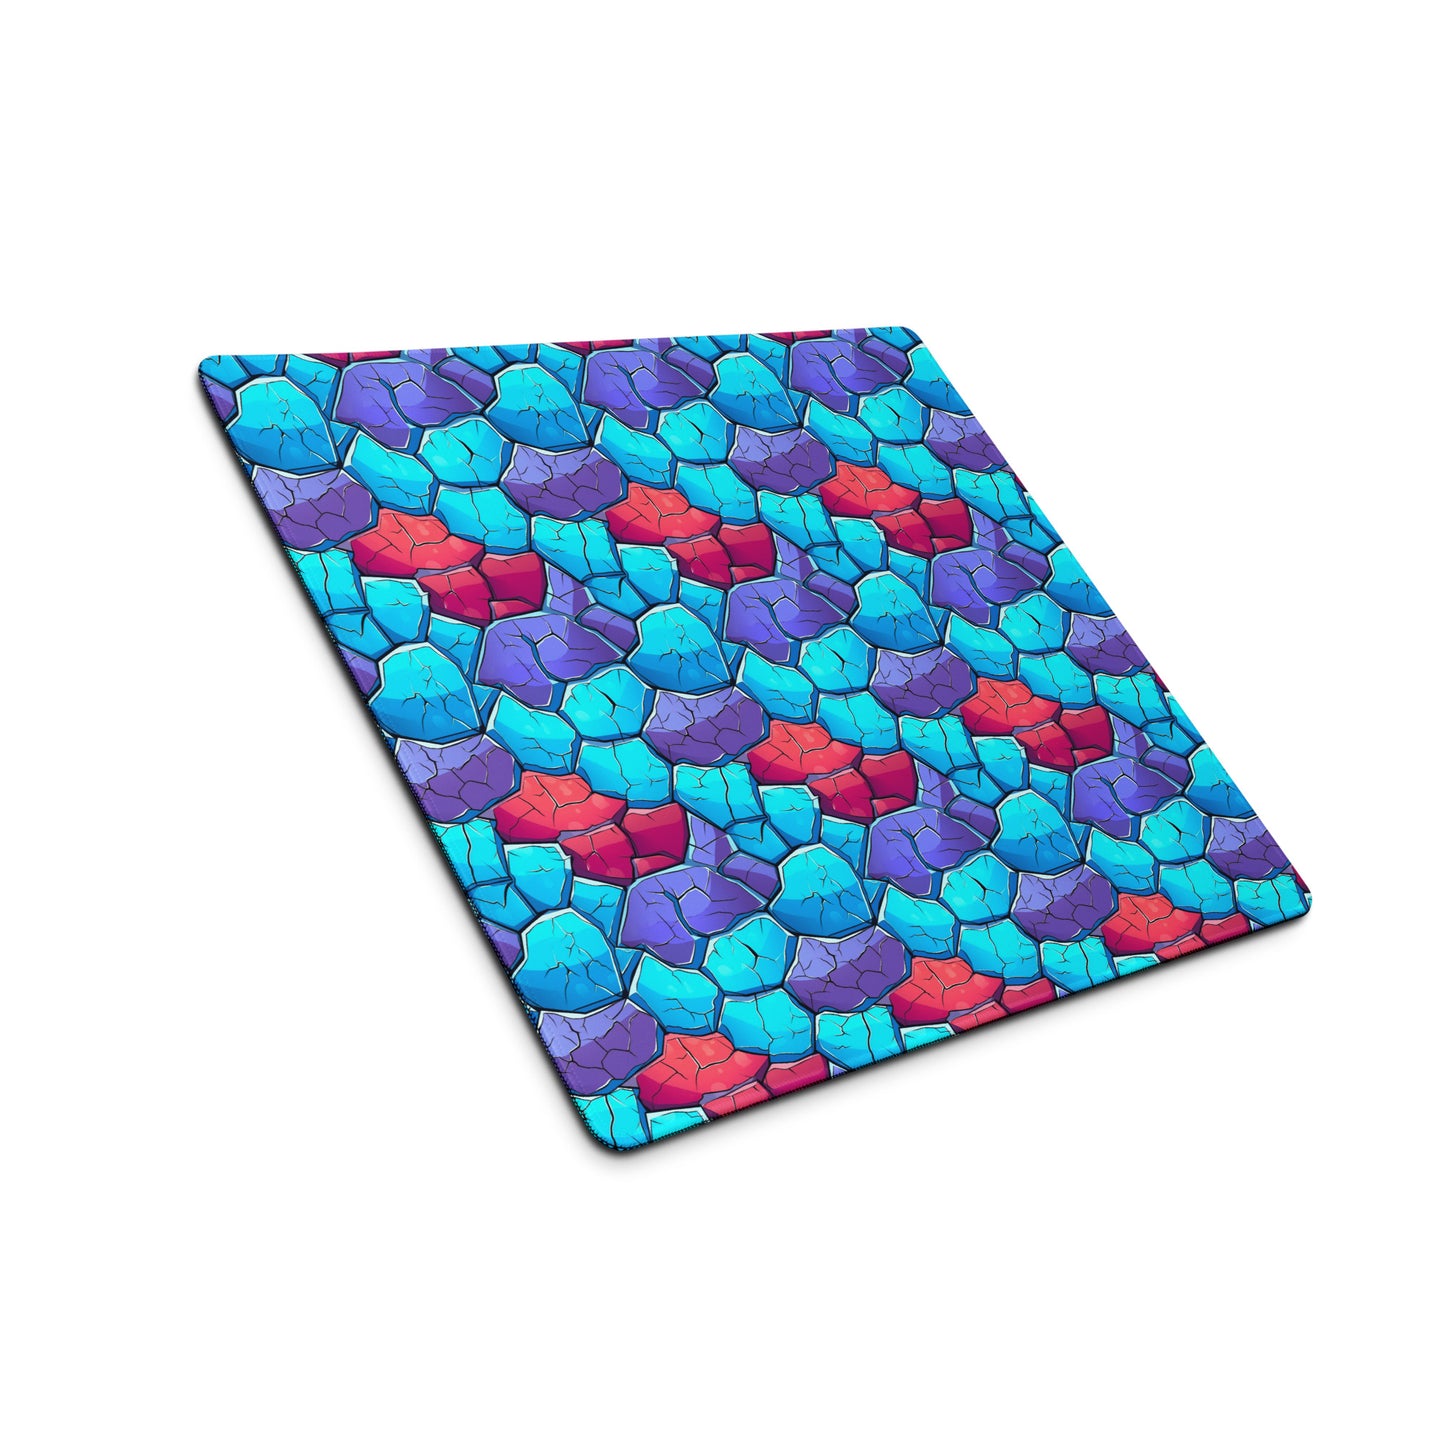 An 18" x 16" gaming desk pad with blue, red, and purple crystals sitting at an angle.